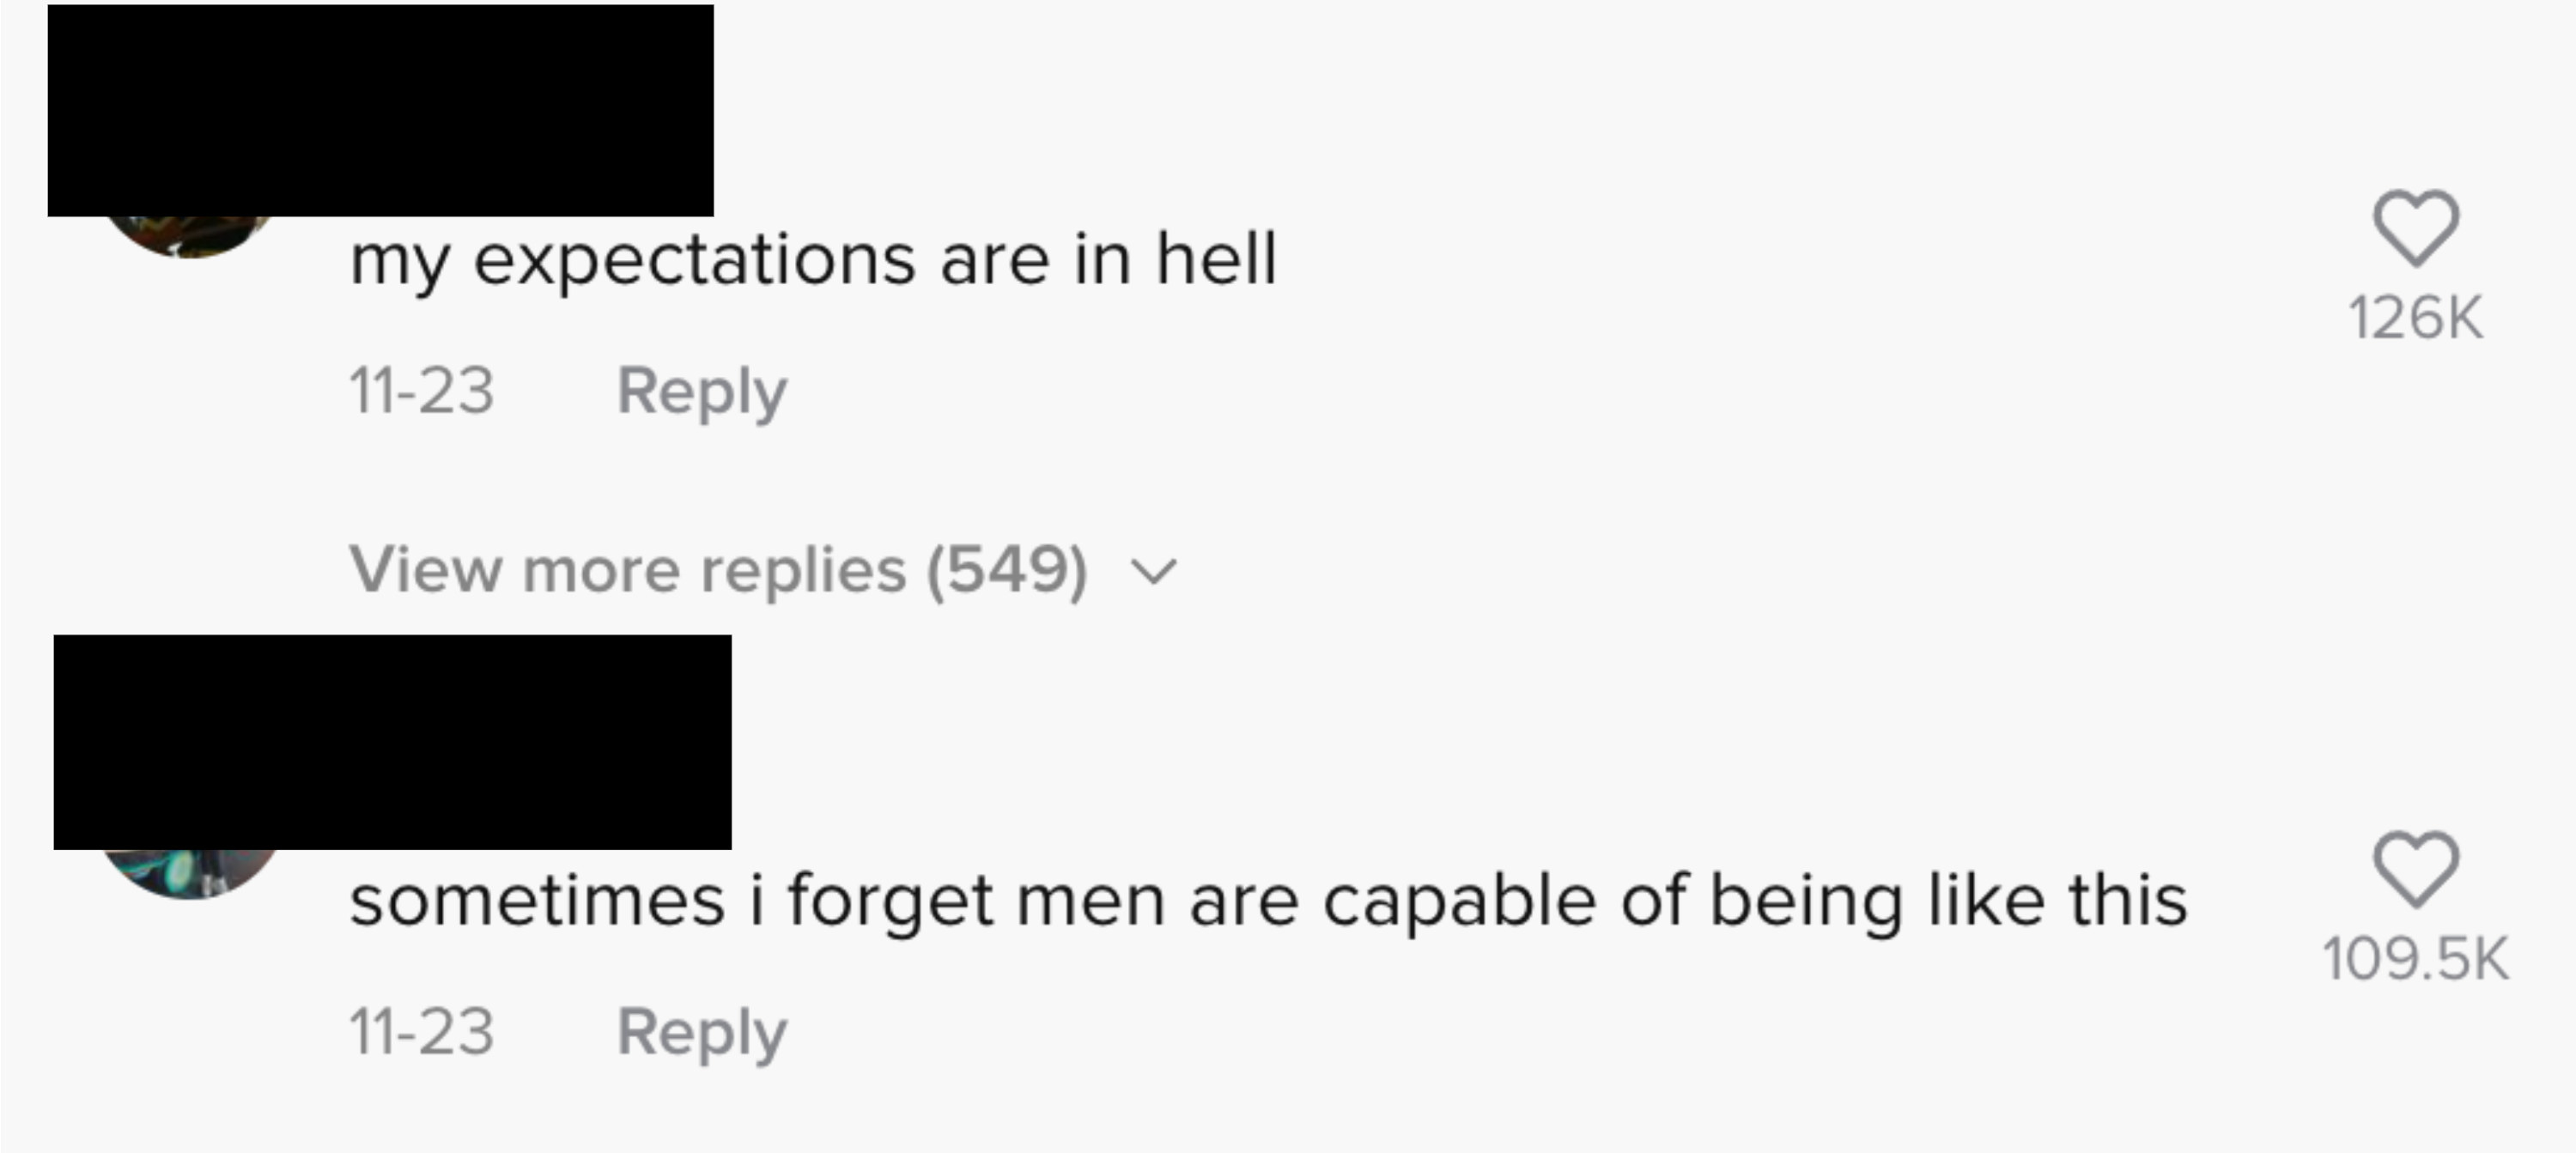 comment saying &quot;my expectations are hell&quot; and &quot;sometimes i forget men are capable of being like this&quot;